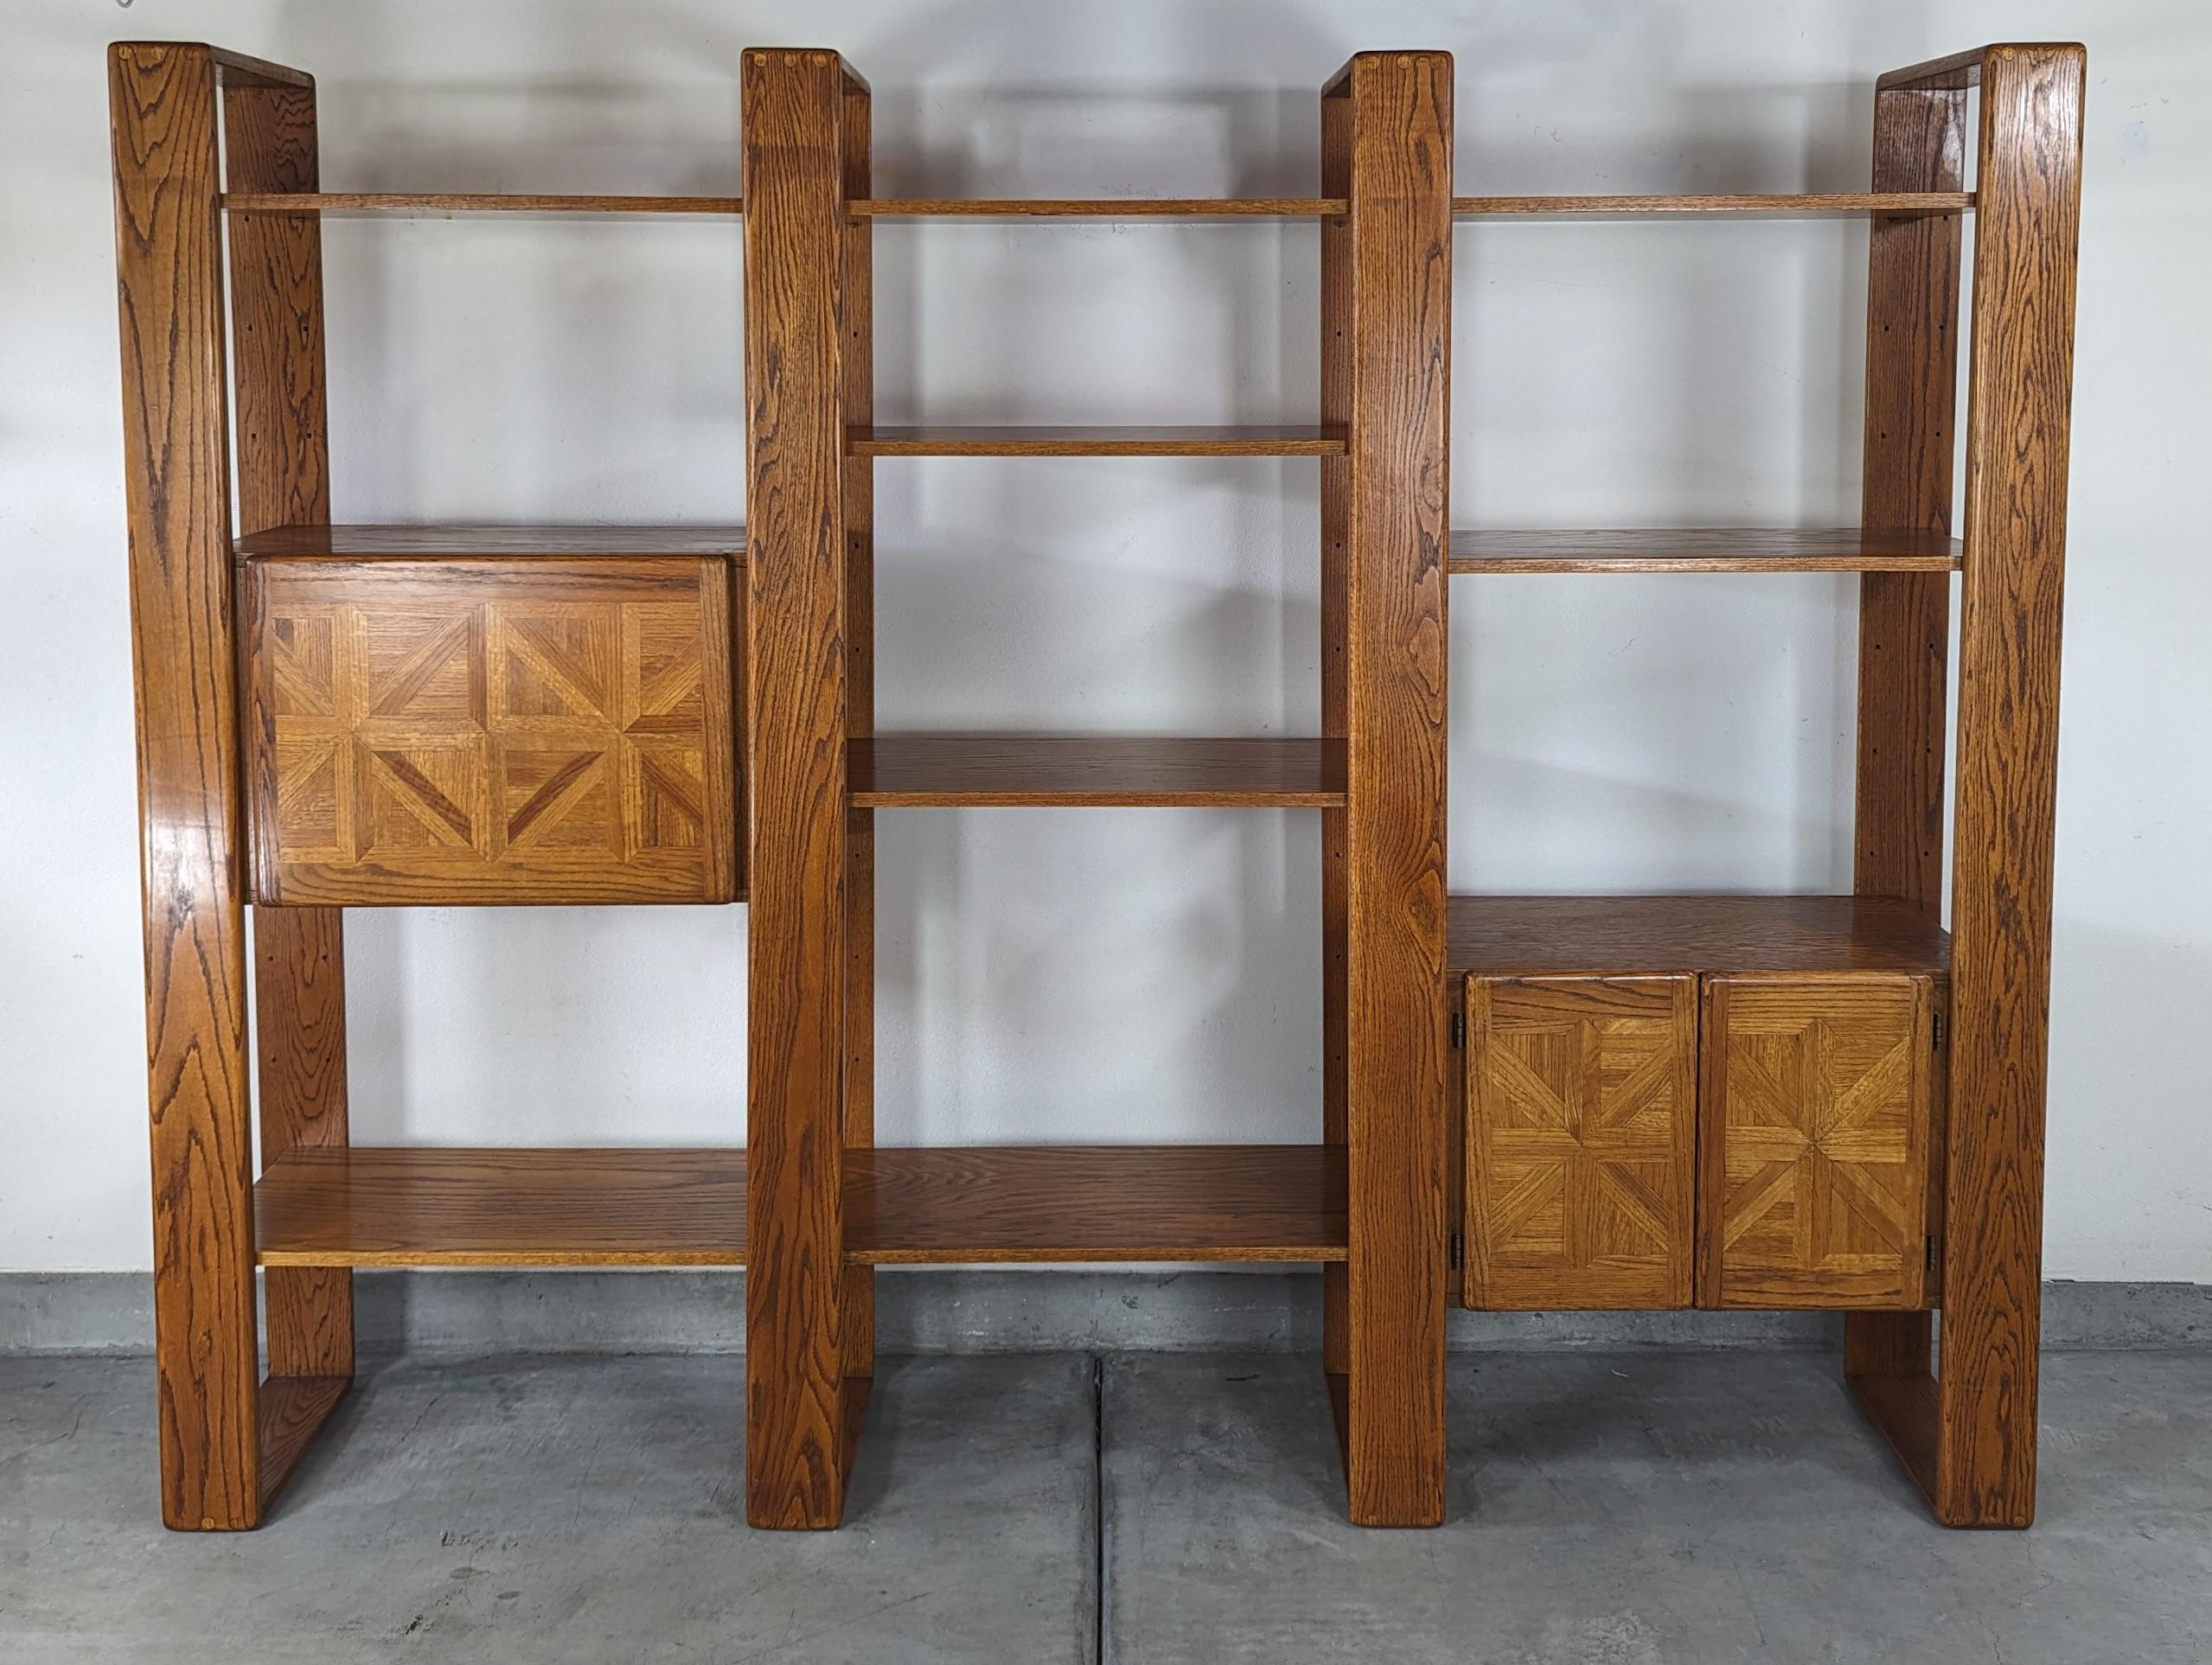 For sale is mid-century modern marvel - a cerused oak modular standalone shelving unit, designed by the renowned Lou Hodges in the 1970s. This cherished piece comes straight from the creative minds of the California Design Group, known for their